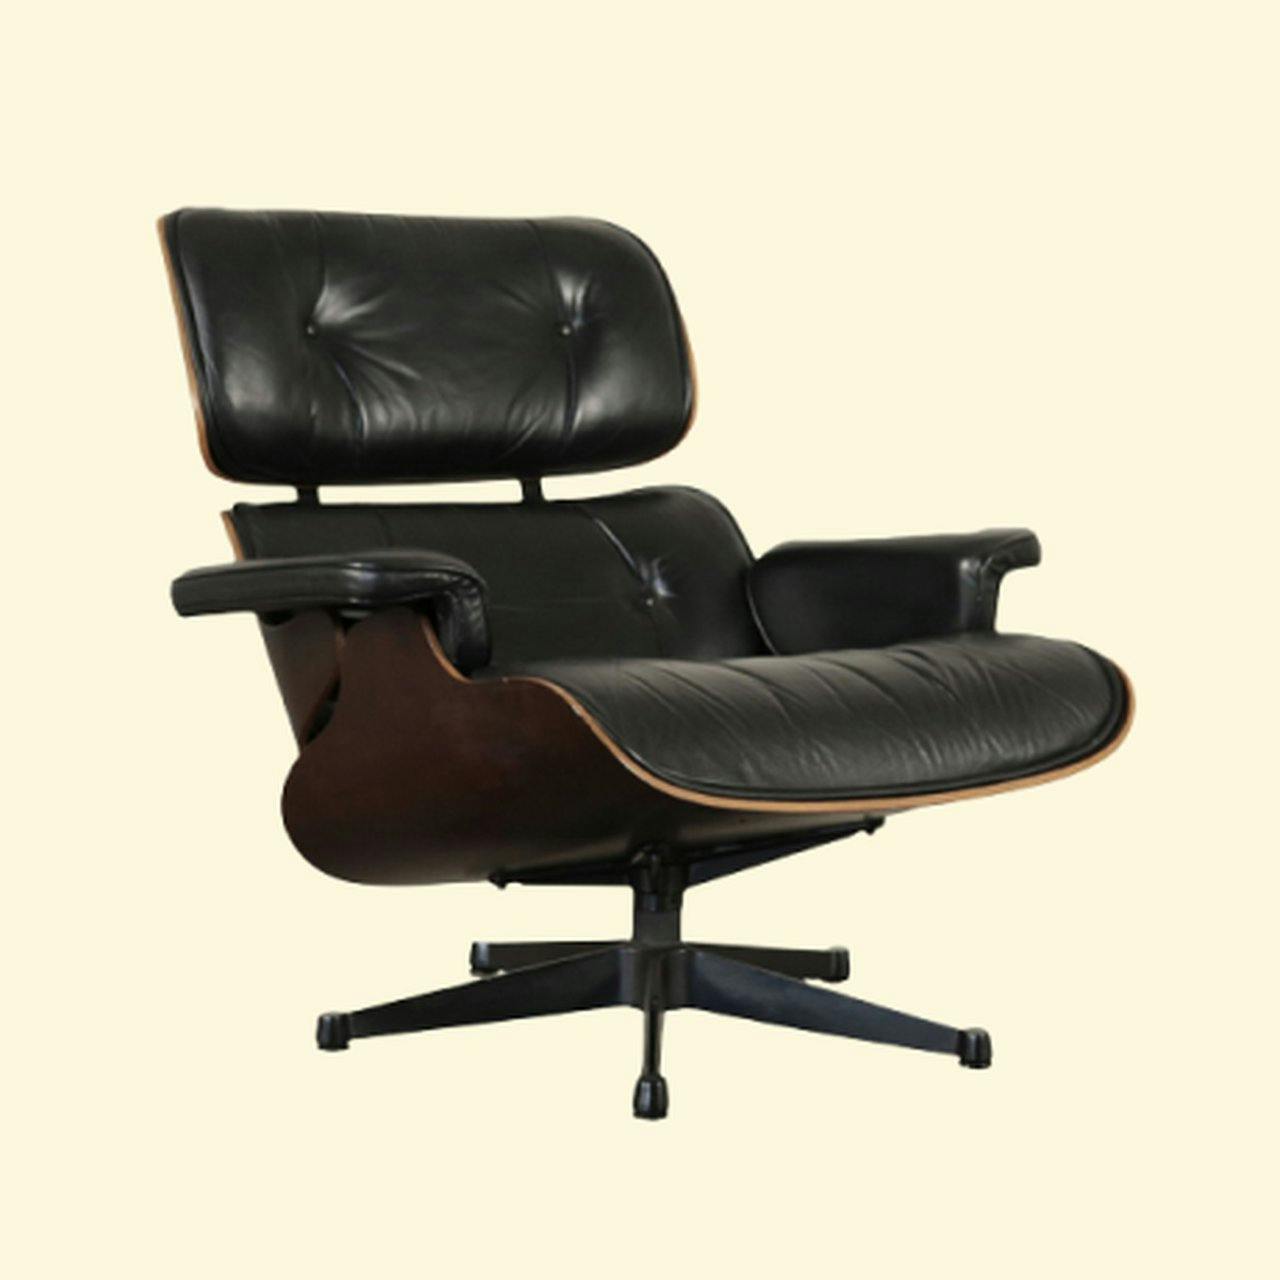 Studio Henk Chairs and lounge chairs